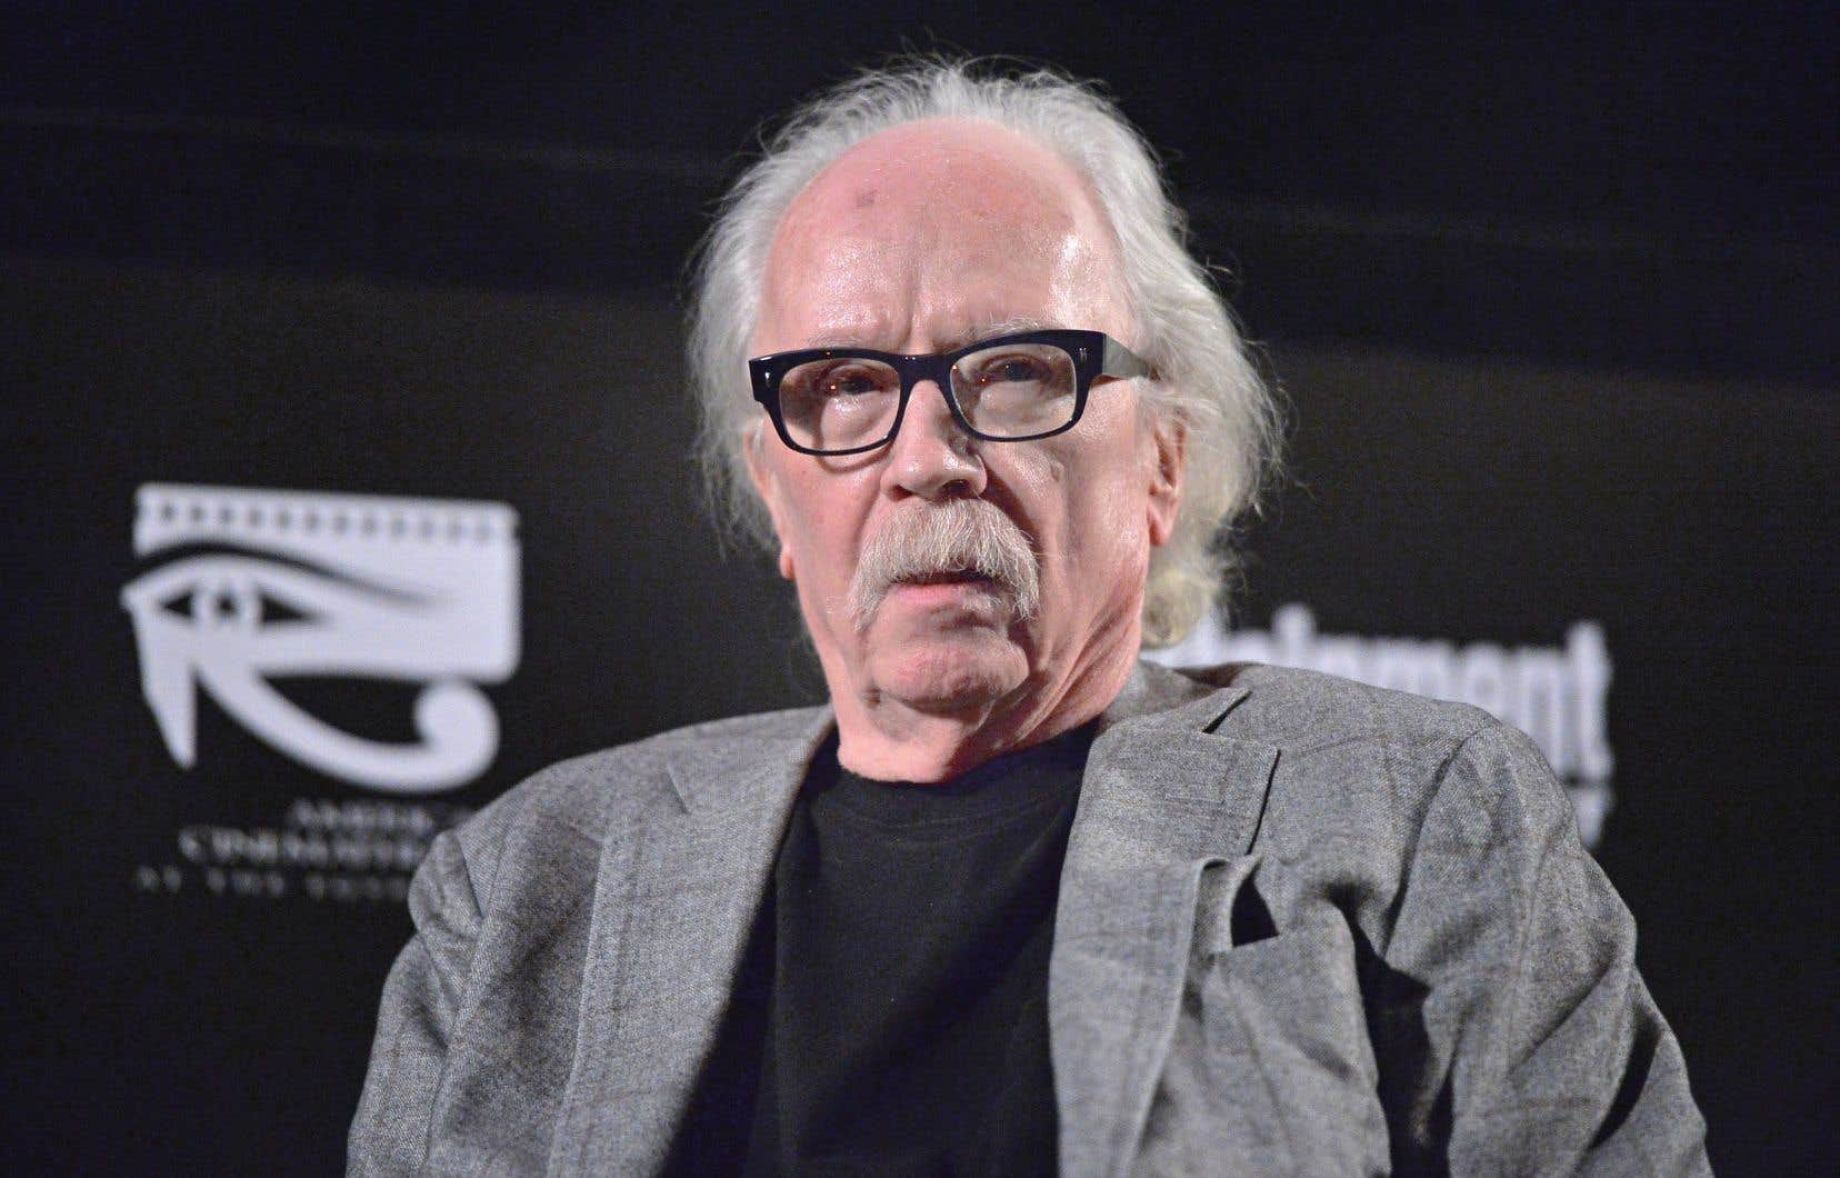 John Carpenter, spending all his remake royalty checks on videogames in  retirement is awesome. How do we convince him to stream? - 9GAG